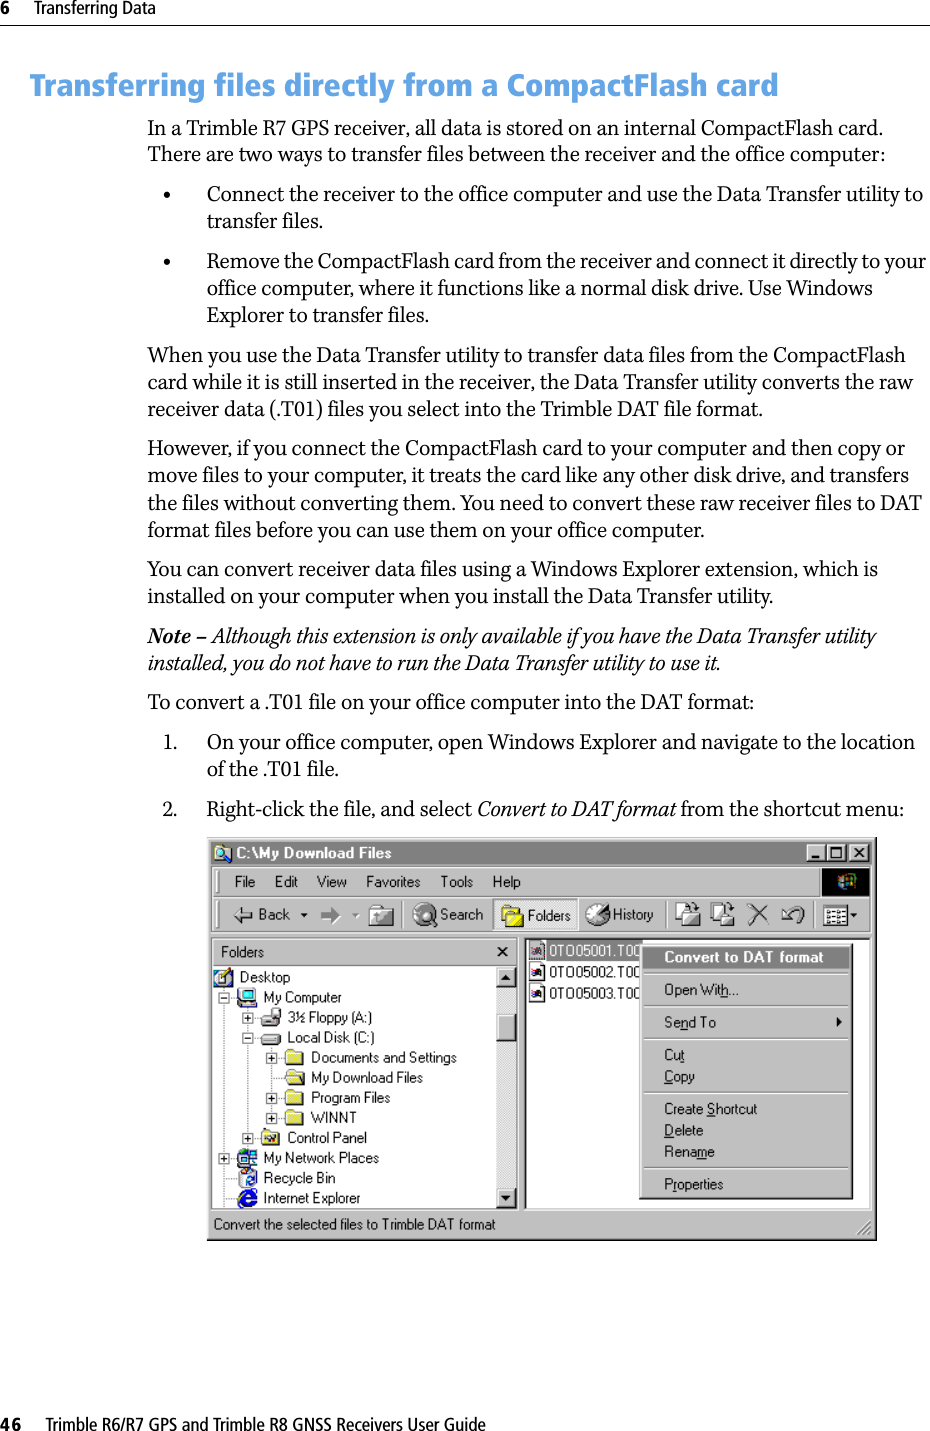 6     Transferring Data46     Trimble R6/R7 GPS and Trimble R8 GNSS Receivers User GuideTrimble R7 GPS Receiver Operation 6.3 Transferring files directly from a CompactFlash cardIn a Trimble R7 GPS receiver, all data is stored on an internal CompactFlash card. There are two ways to transfer files between the receiver and the office computer:•Connect the receiver to the office computer and use the Data Transfer utility to transfer files.•Remove the CompactFlash card from the receiver and connect it directly to your office computer, where it functions like a normal disk drive. Use Windows Explorer to transfer files.When you use the Data Transfer utility to transfer data files from the CompactFlash card while it is still inserted in the receiver, the Data Transfer utility converts the raw receiver data (.T01) files you select into the Trimble DAT file format.However, if you connect the CompactFlash card to your computer and then copy or move files to your computer, it treats the card like any other disk drive, and transfers the files without converting them. You need to convert these raw receiver files to DAT format files before you can use them on your office computer.You can convert receiver data files using a Windows Explorer extension, which is installed on your computer when you install the Data Transfer utility. Note – Although this extension is only available if you have the Data Transfer utility installed, you do not have to run the Data Transfer utility to use it.To convert a .T01 file on your office computer into the DAT format:1. On your office computer, open Windows Explorer and navigate to the location of the .T01 file. 2. Right-click the file, and select Convert to DAT format from the shortcut menu: 